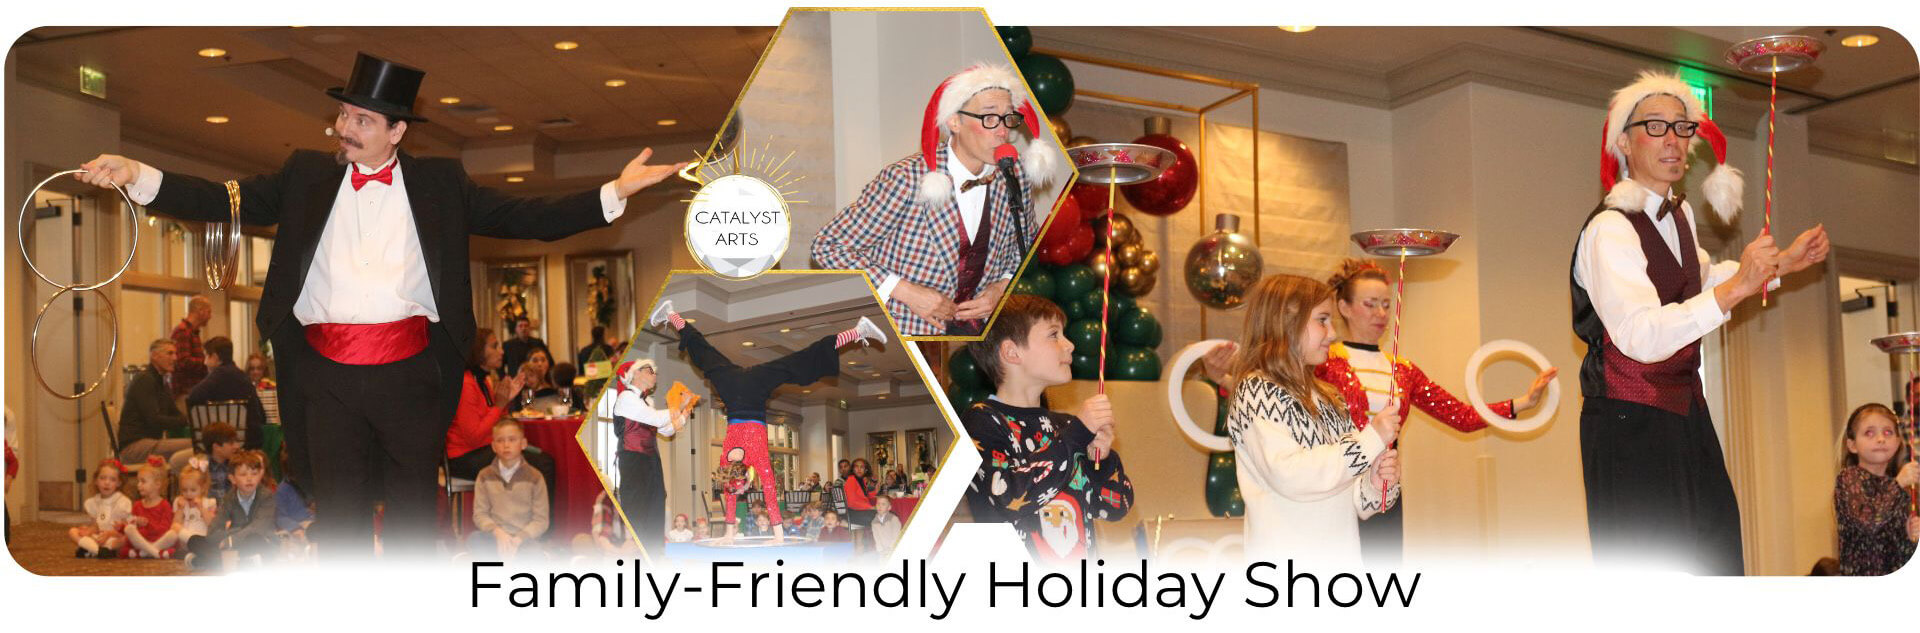 Kid friendly holiday stage show in the SF Bay Area with Catalyst Arts